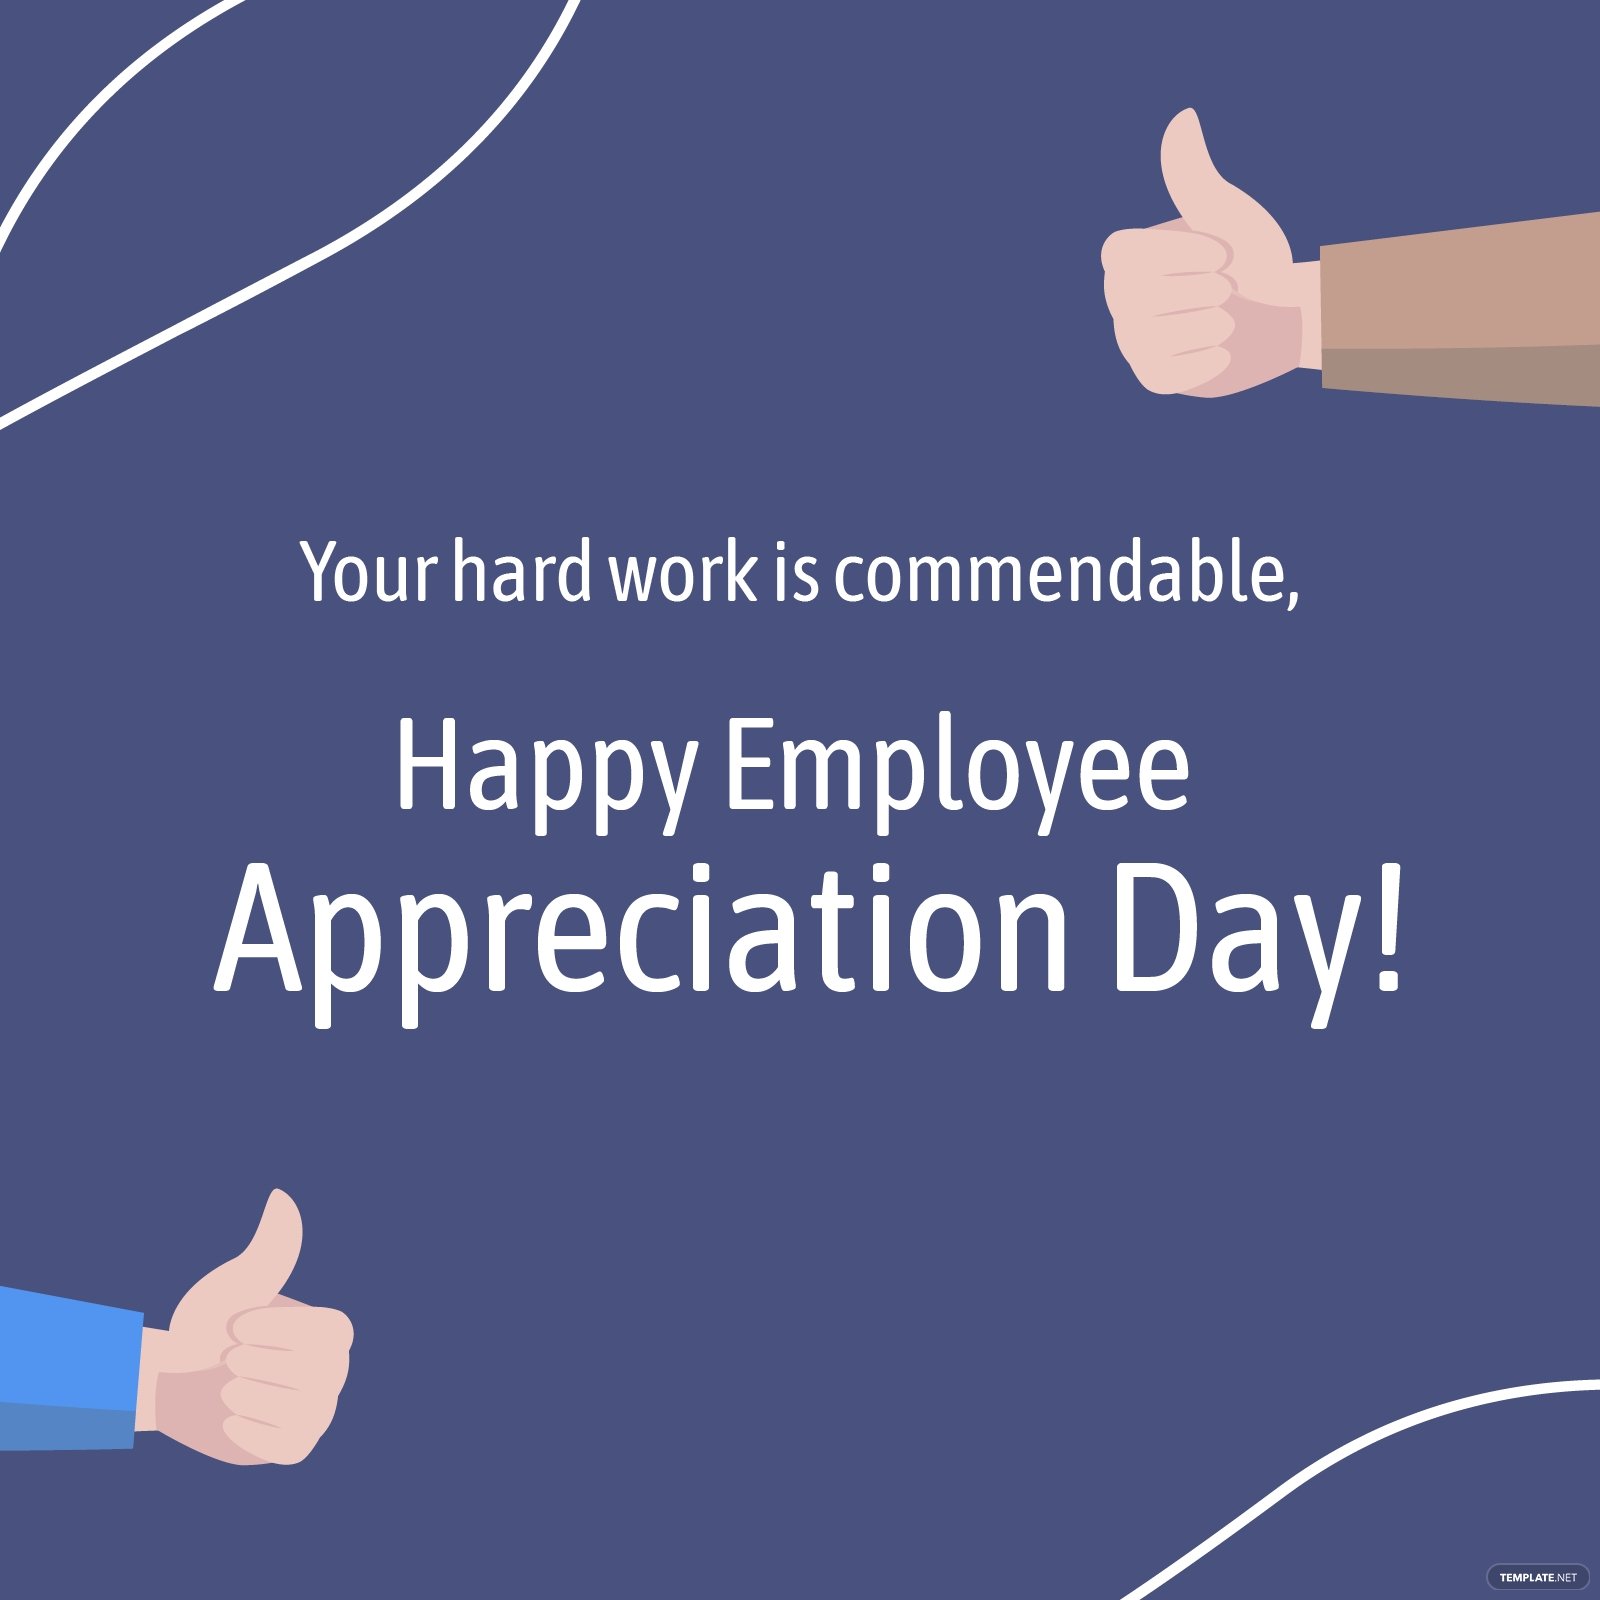 employee appreciation day wishes vector ideas and examples